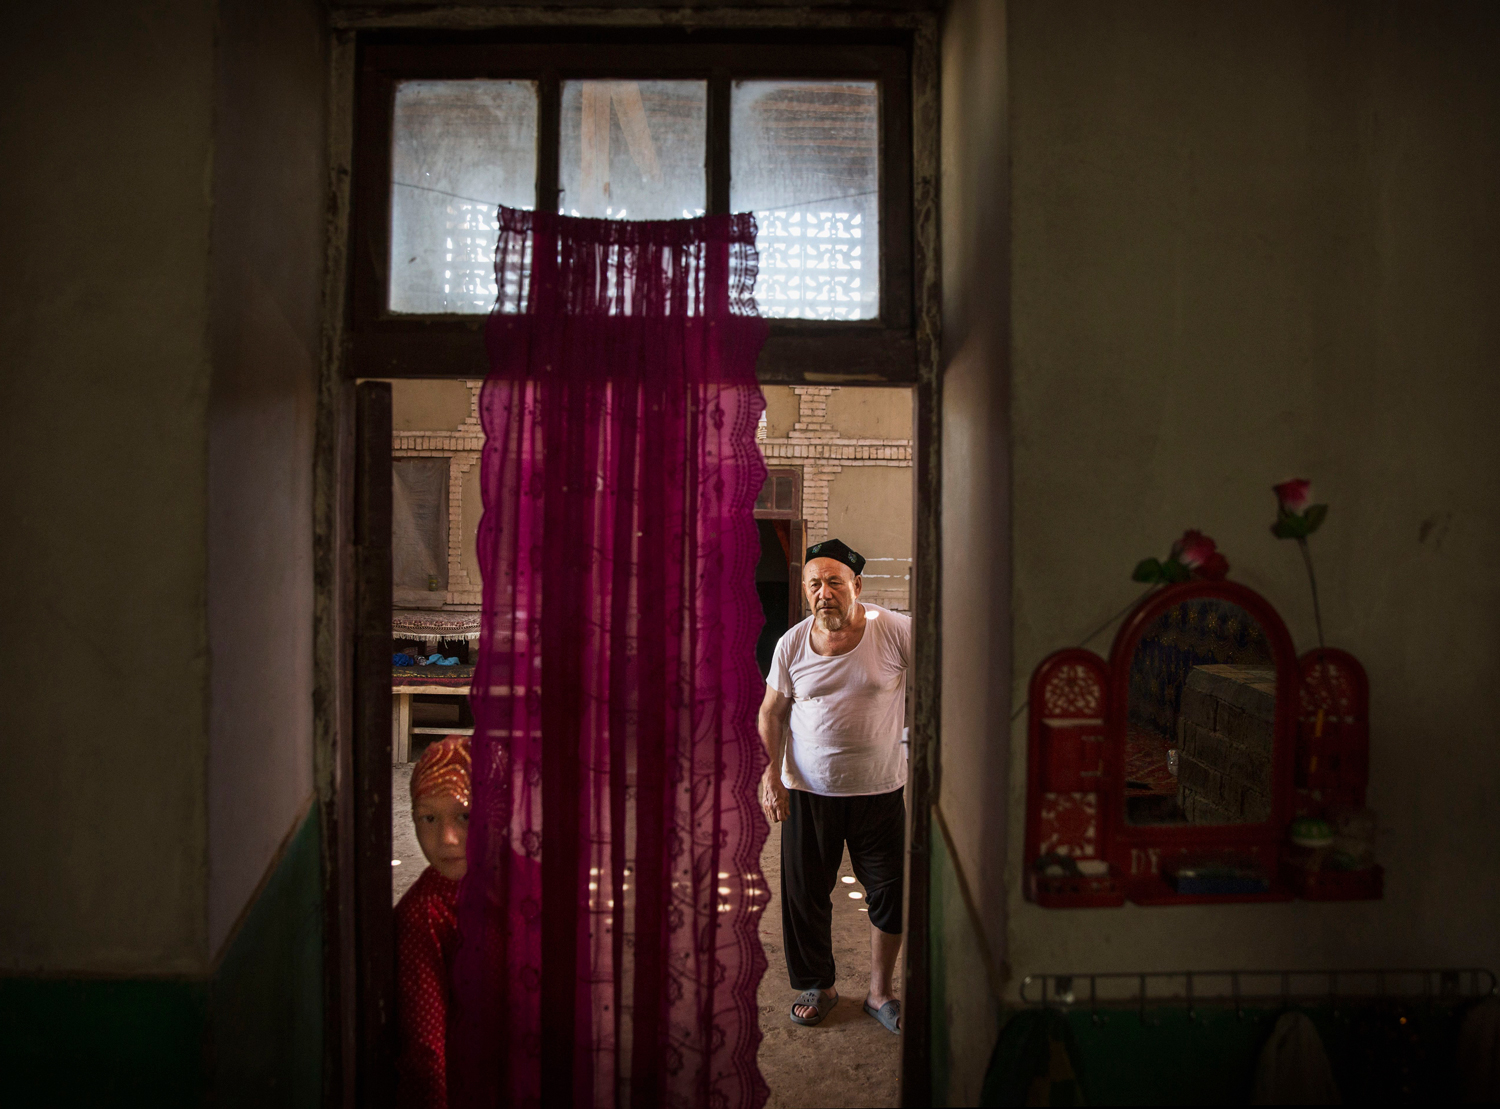 China’s Government Has Ordered a Million Citizens to Occupy Uighur Homes. Here’s What They Think They’re Doing.